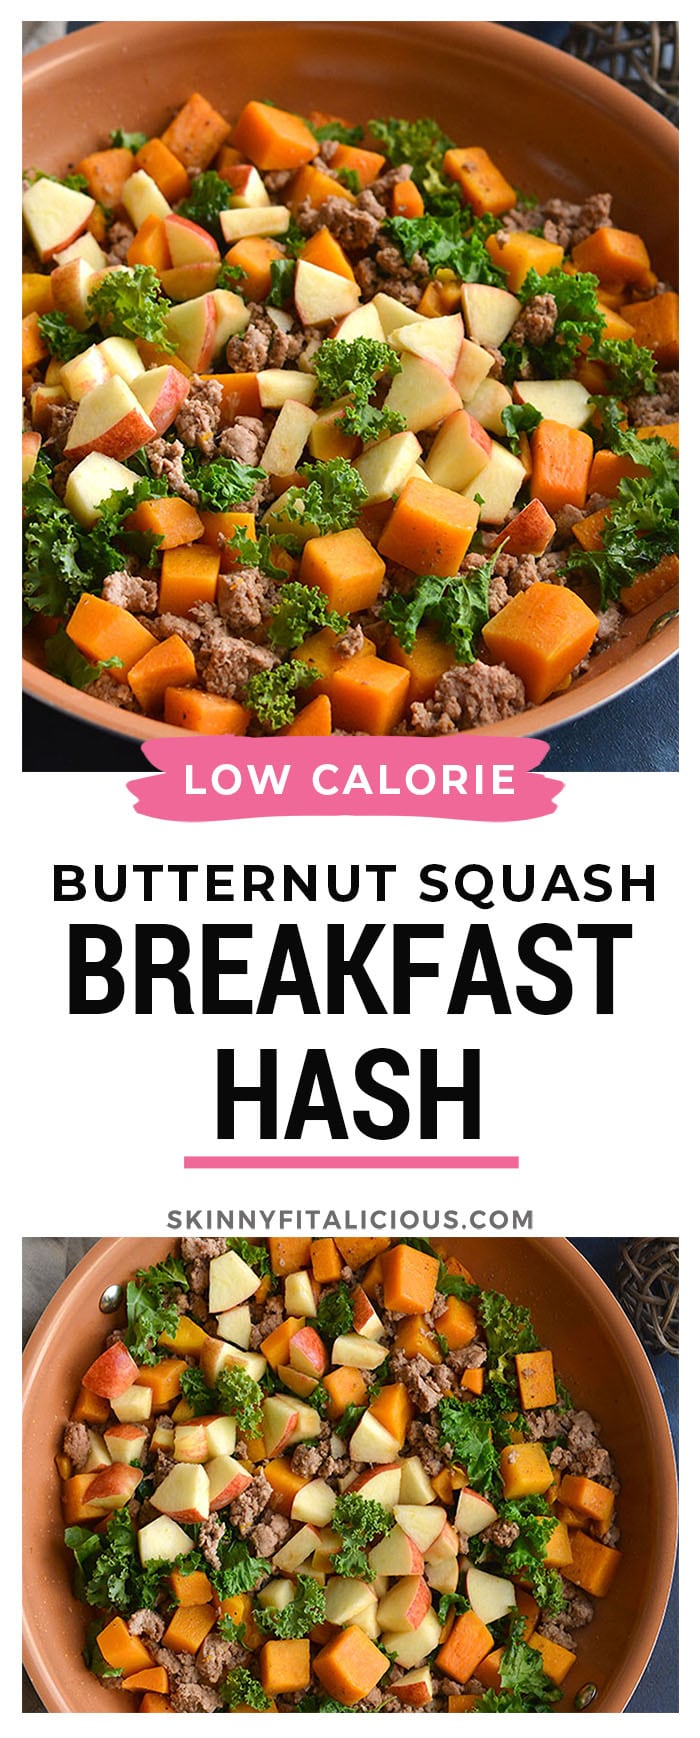 This Butternut Squash Breakfast Hash is loaded with nourishment and has the perfect balance of sweet and savory flavors. High protein, this is a delicious breakfast without the eggs! Whole30 + Paleo + Gluten Free + Low Calorie